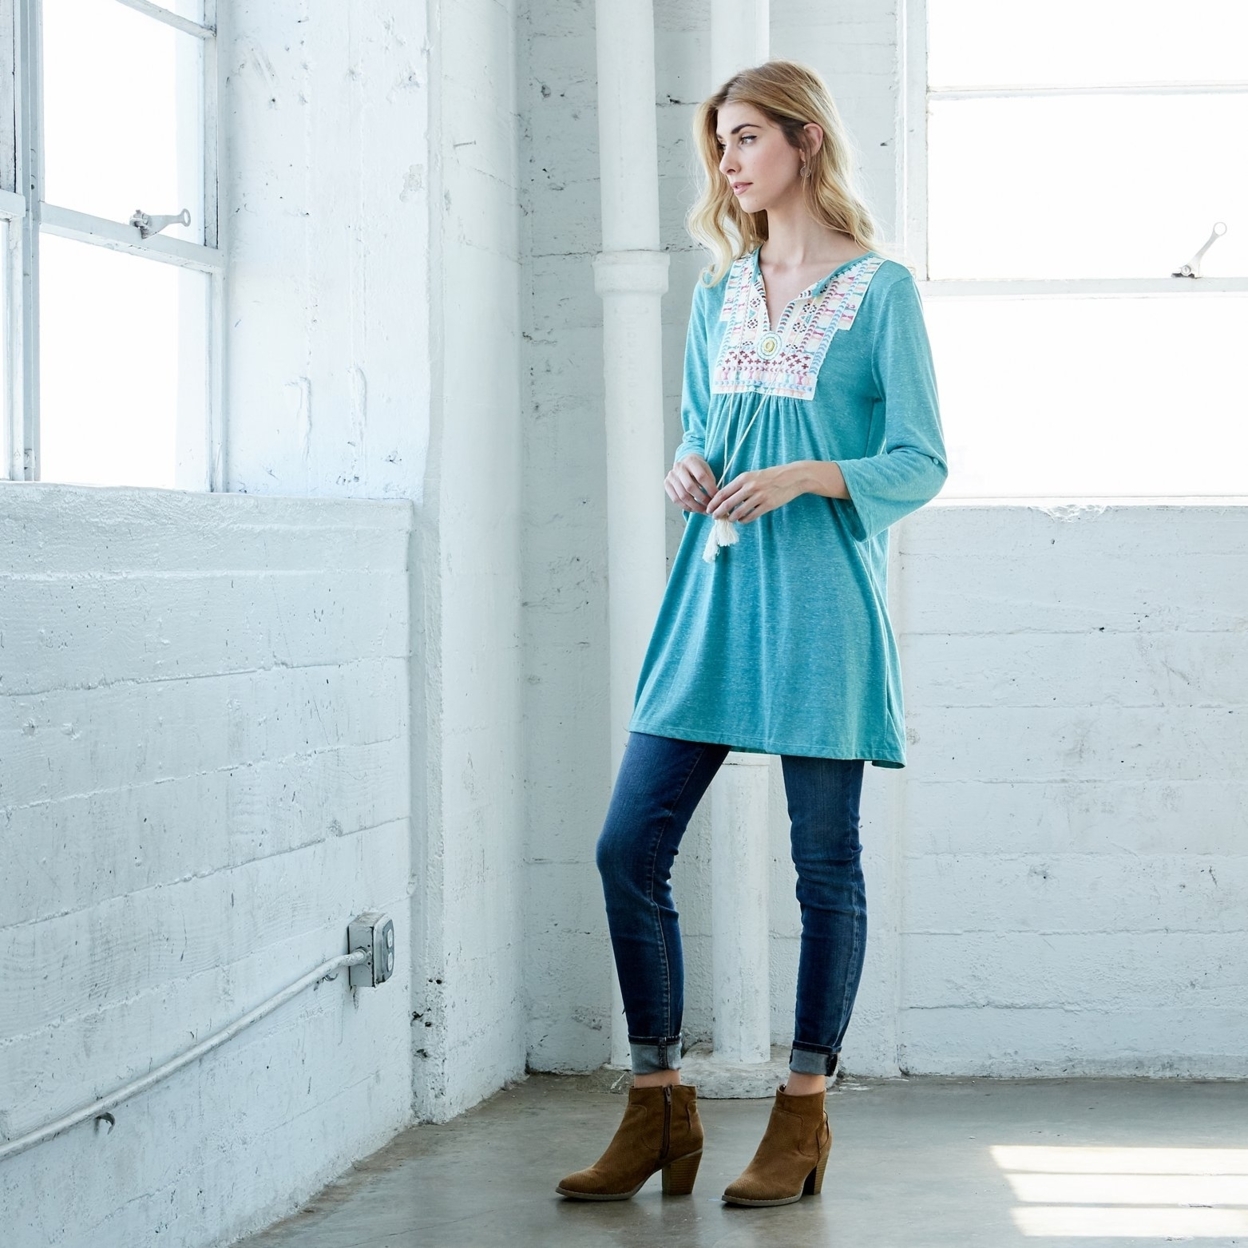 Adorn Me Tunic Top - Teal, Small (2-6)